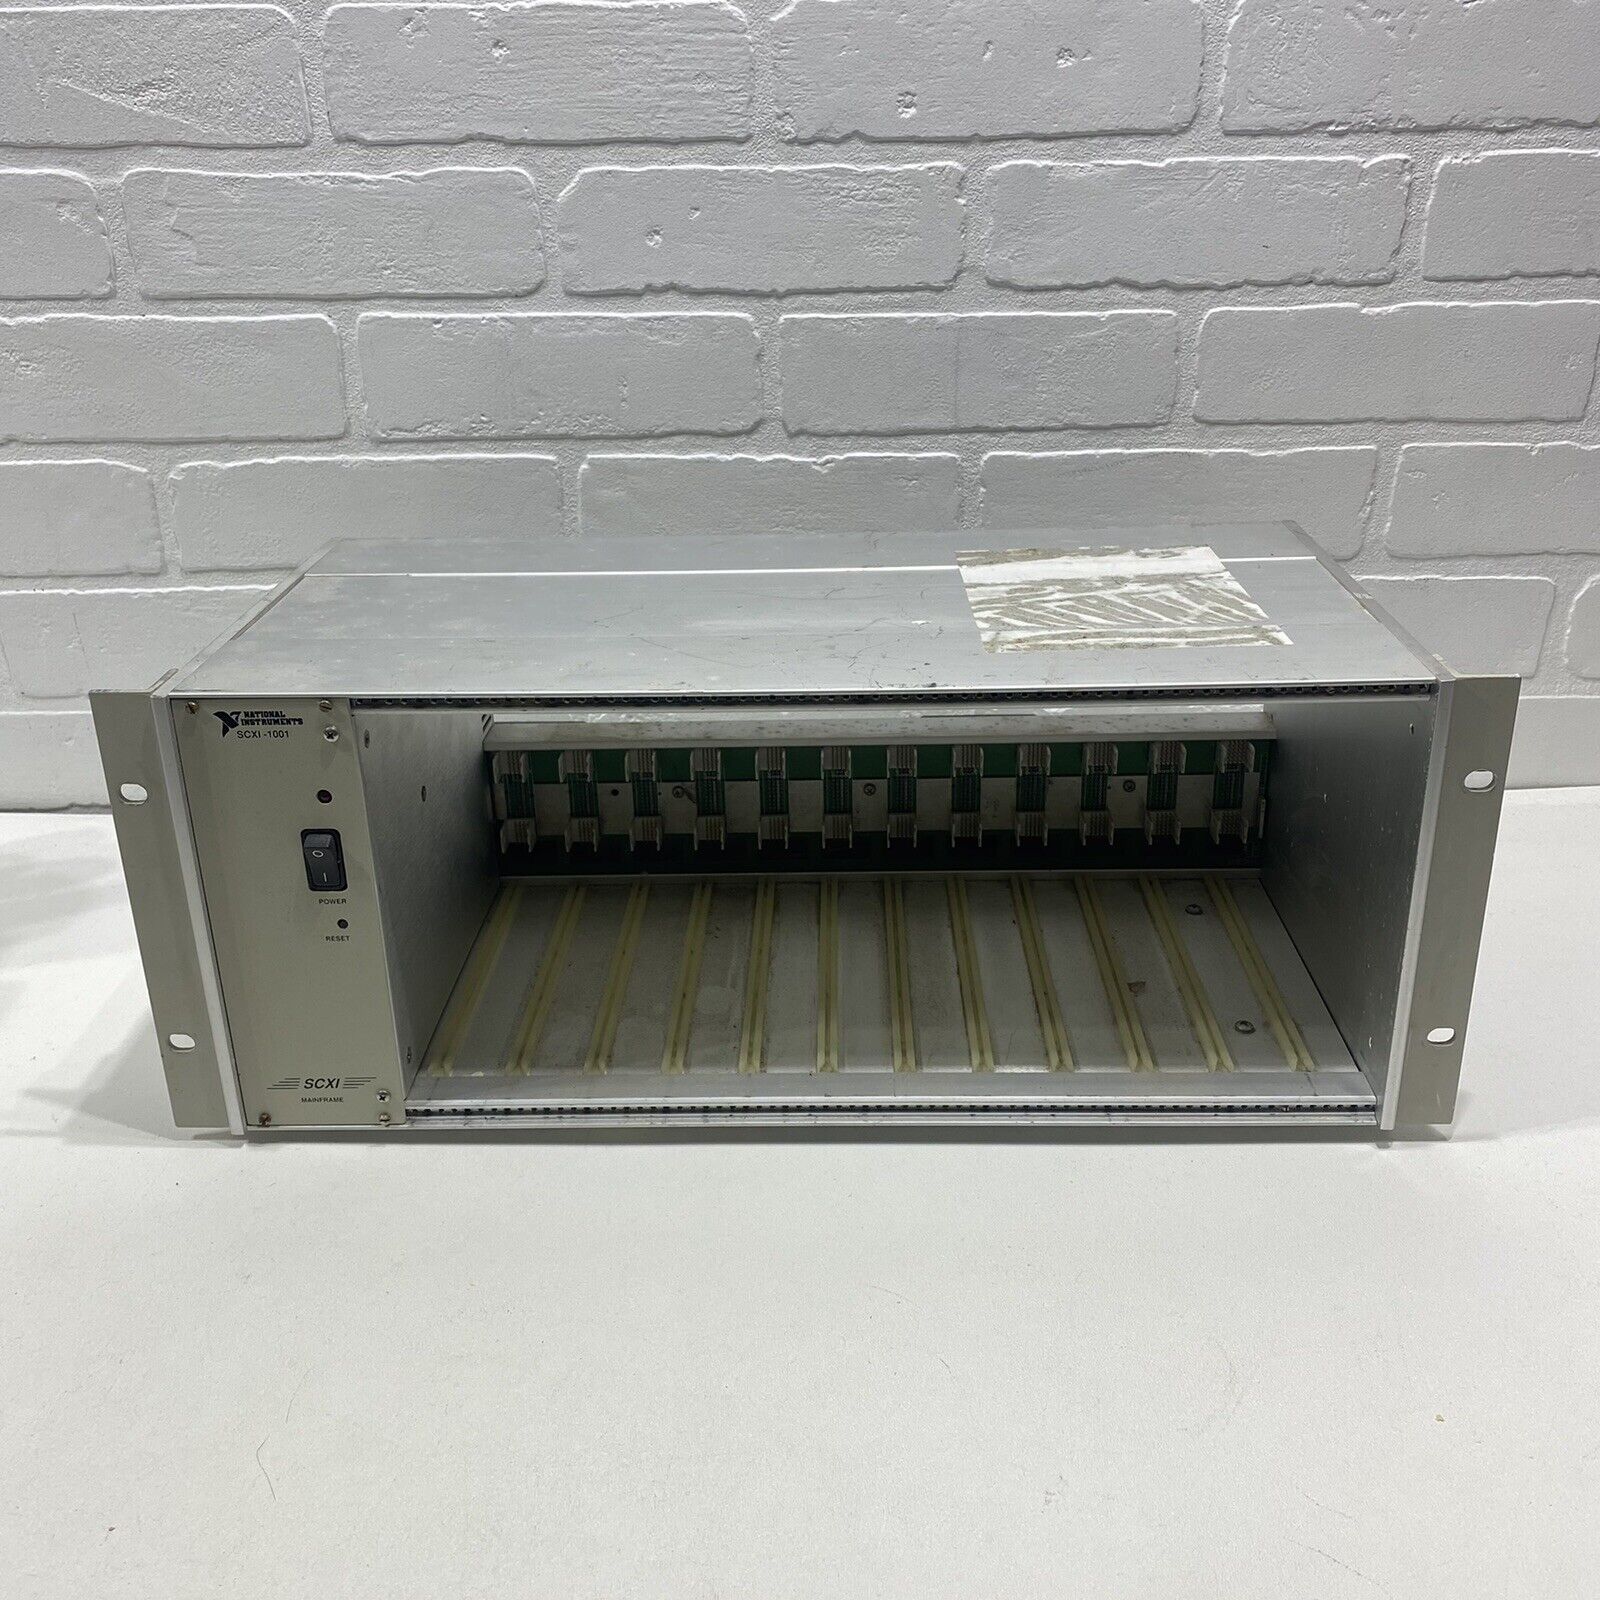 National Instruments NI SCXI-1001 12-Slot Chassis Power Supply Mainframe